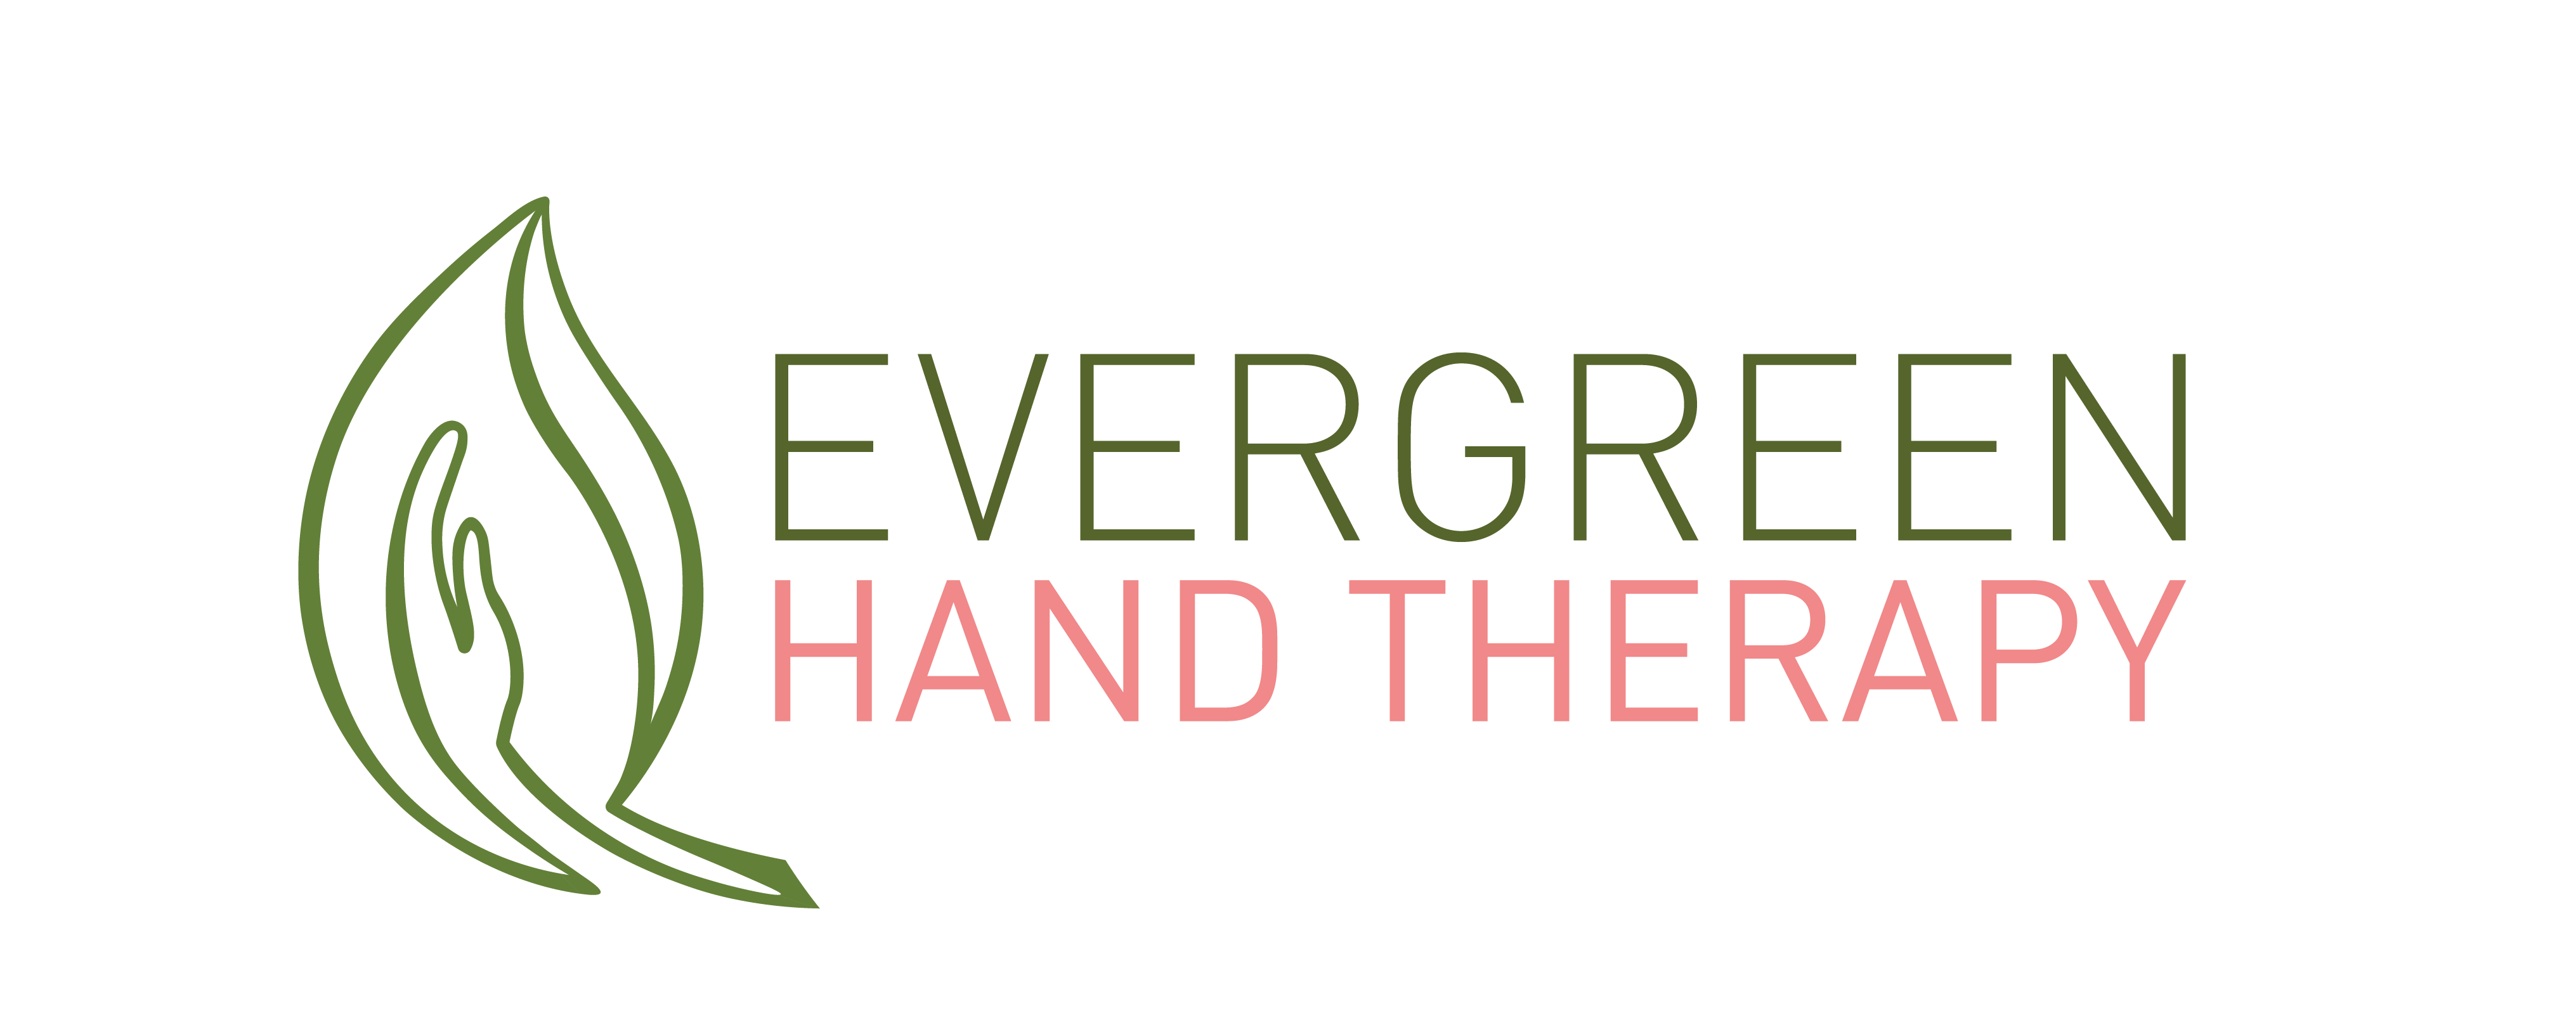 Evergreen Hand Therapy